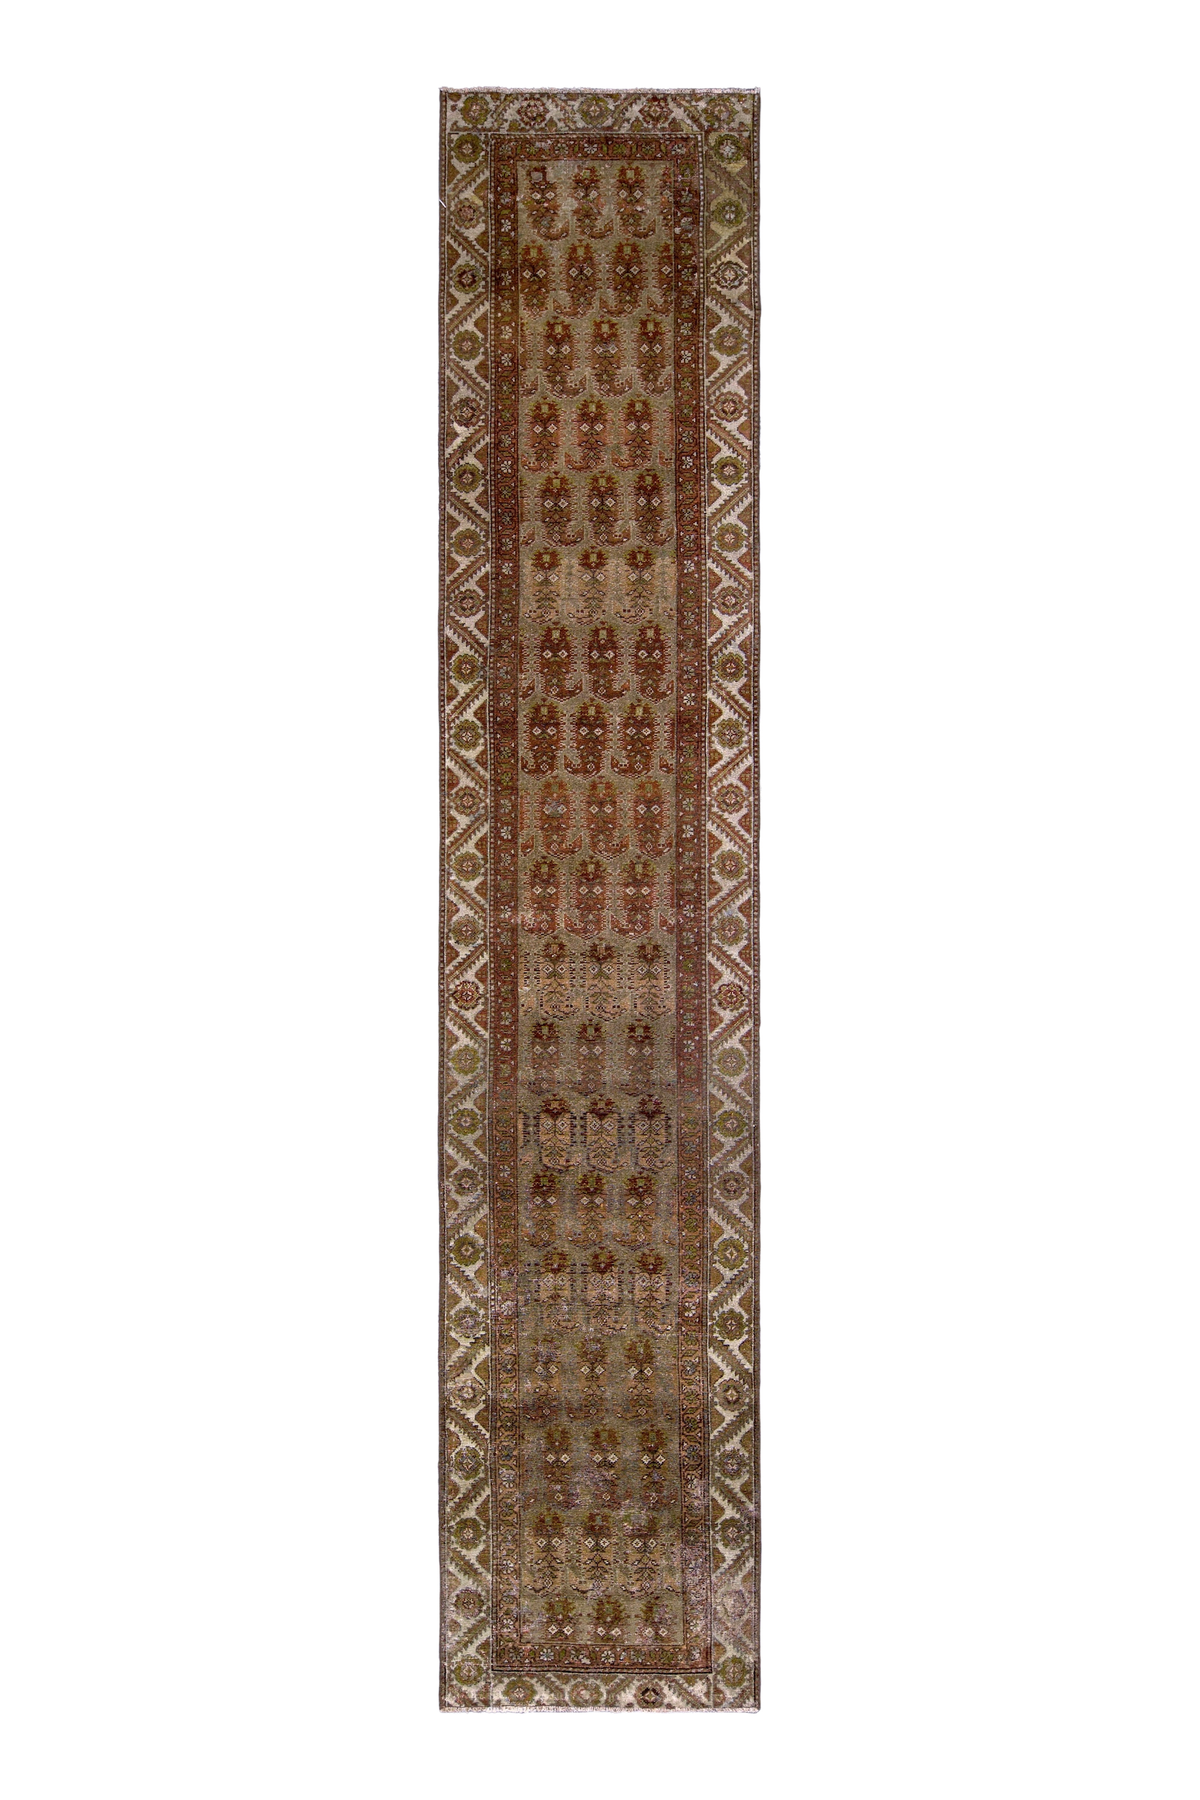 Nidha - The Red Elegance of Persian Runners | Kuden Rugs